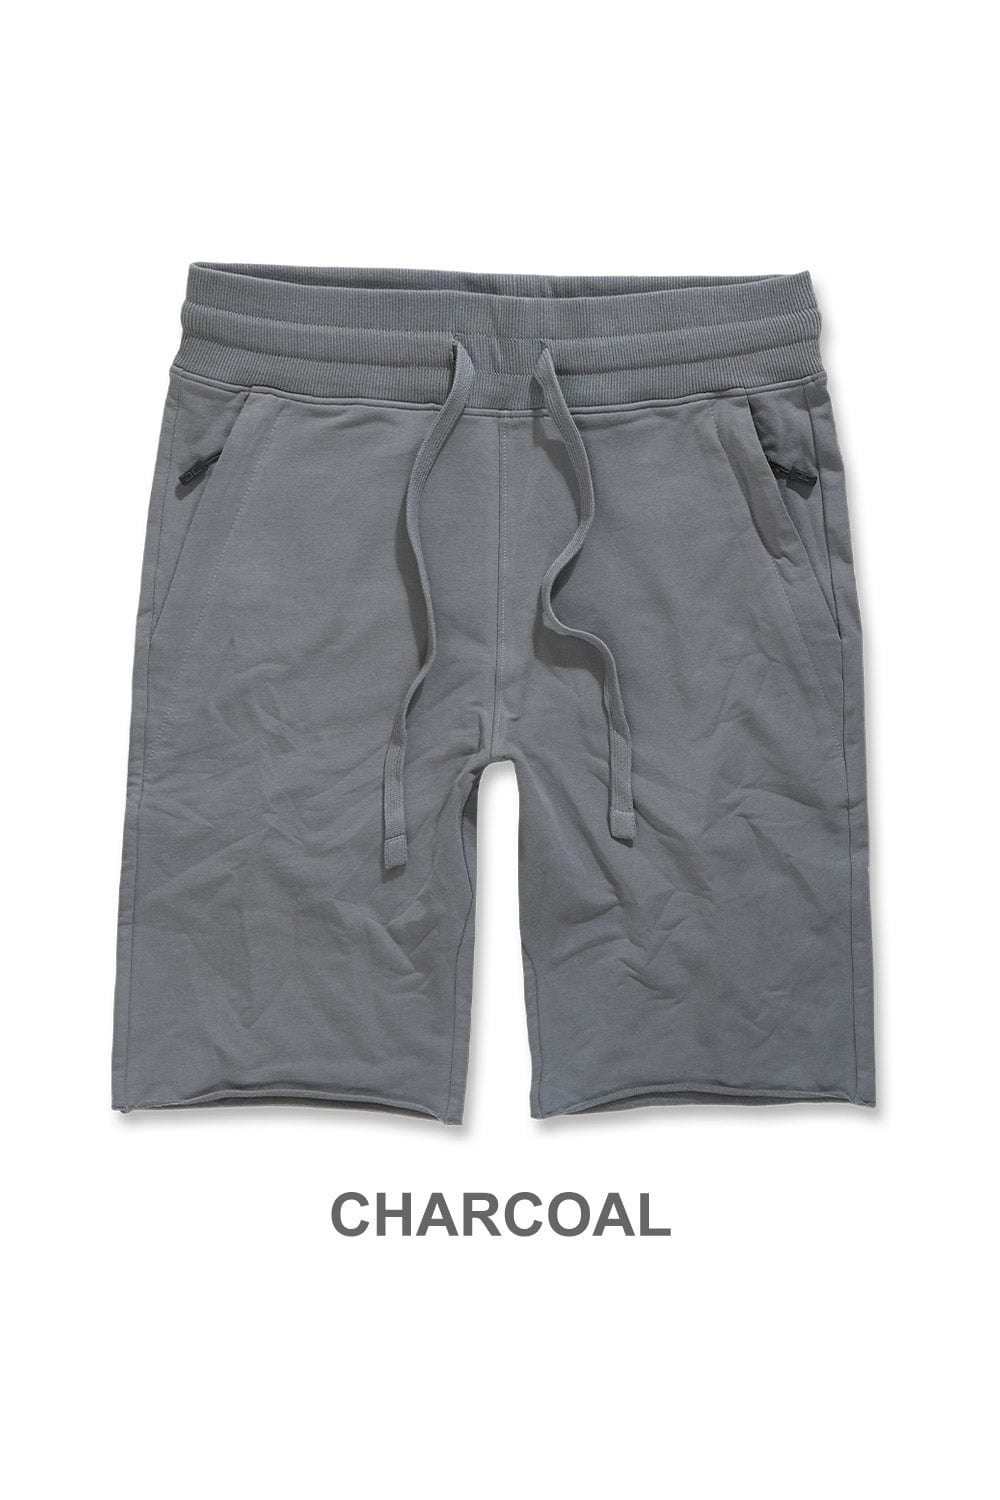 Jordan Craig OG - Palma French Terry Shorts (Spring Exclusives) Charcoal / S